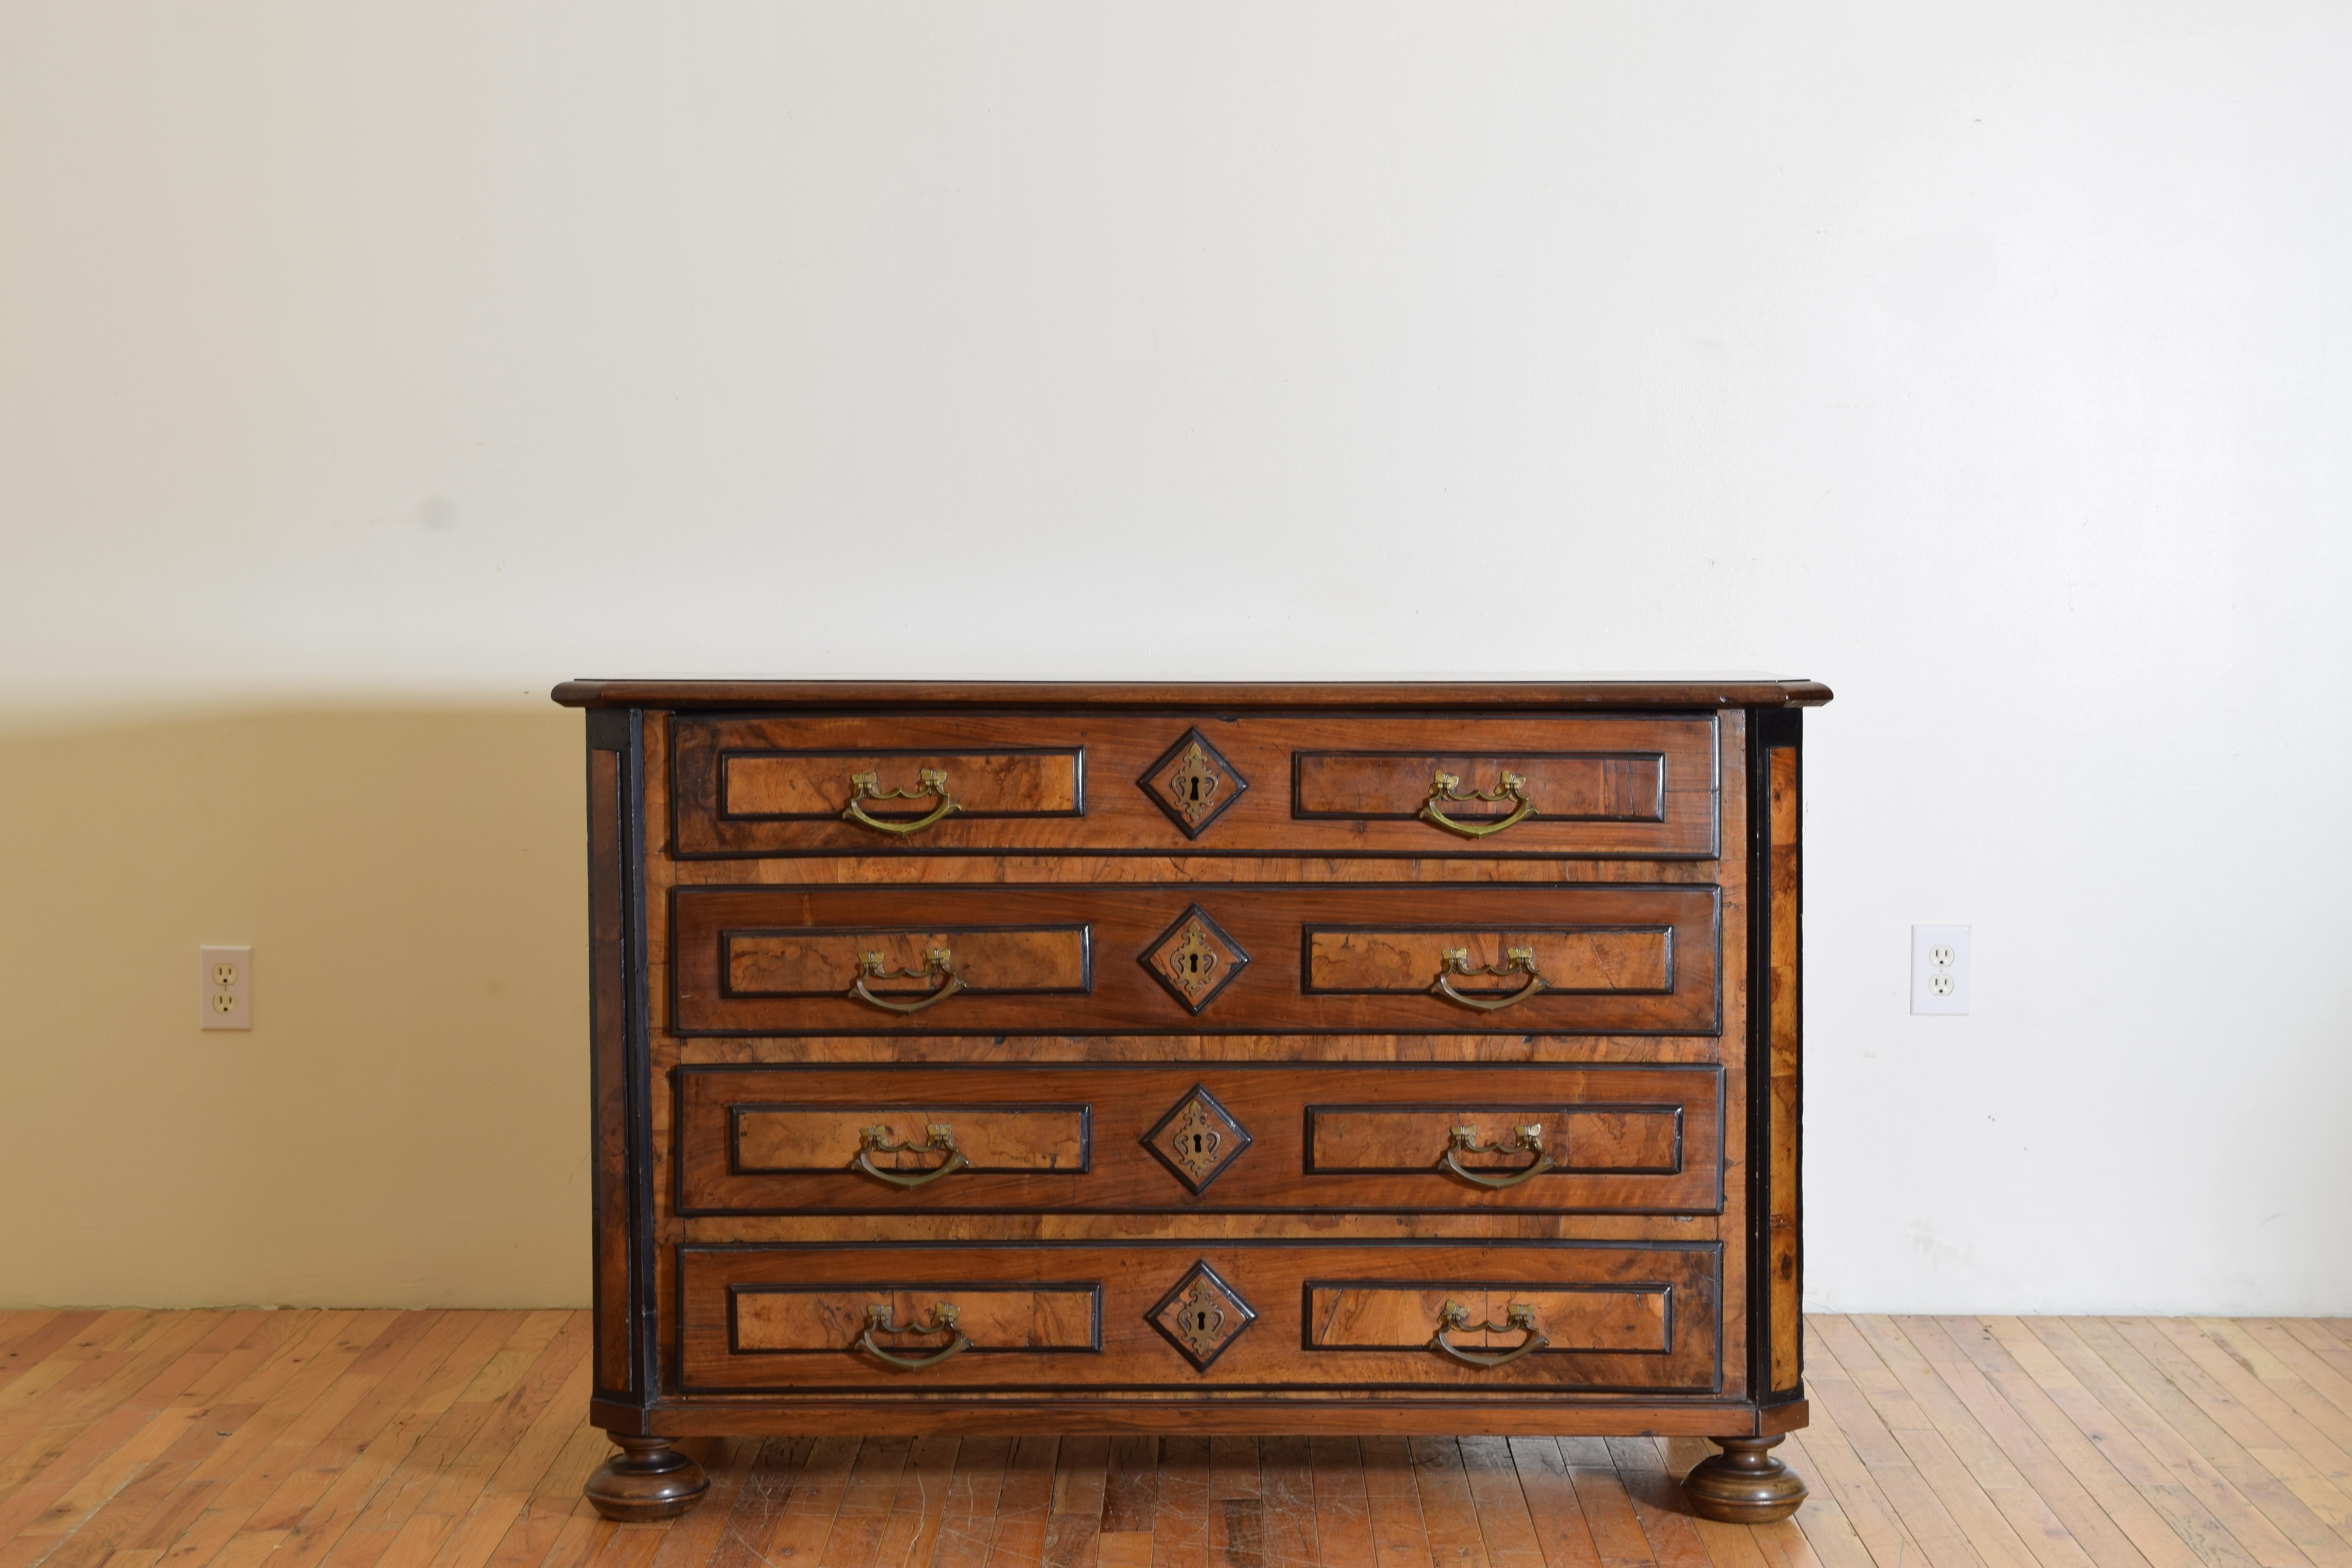 having a rectangular top with edge molding and slightly canted corners atop a confornming case housing three drawers with original antique hardware, the drawers, corners, and sides all with burl walnut veneers, the sides also with large star inlays,